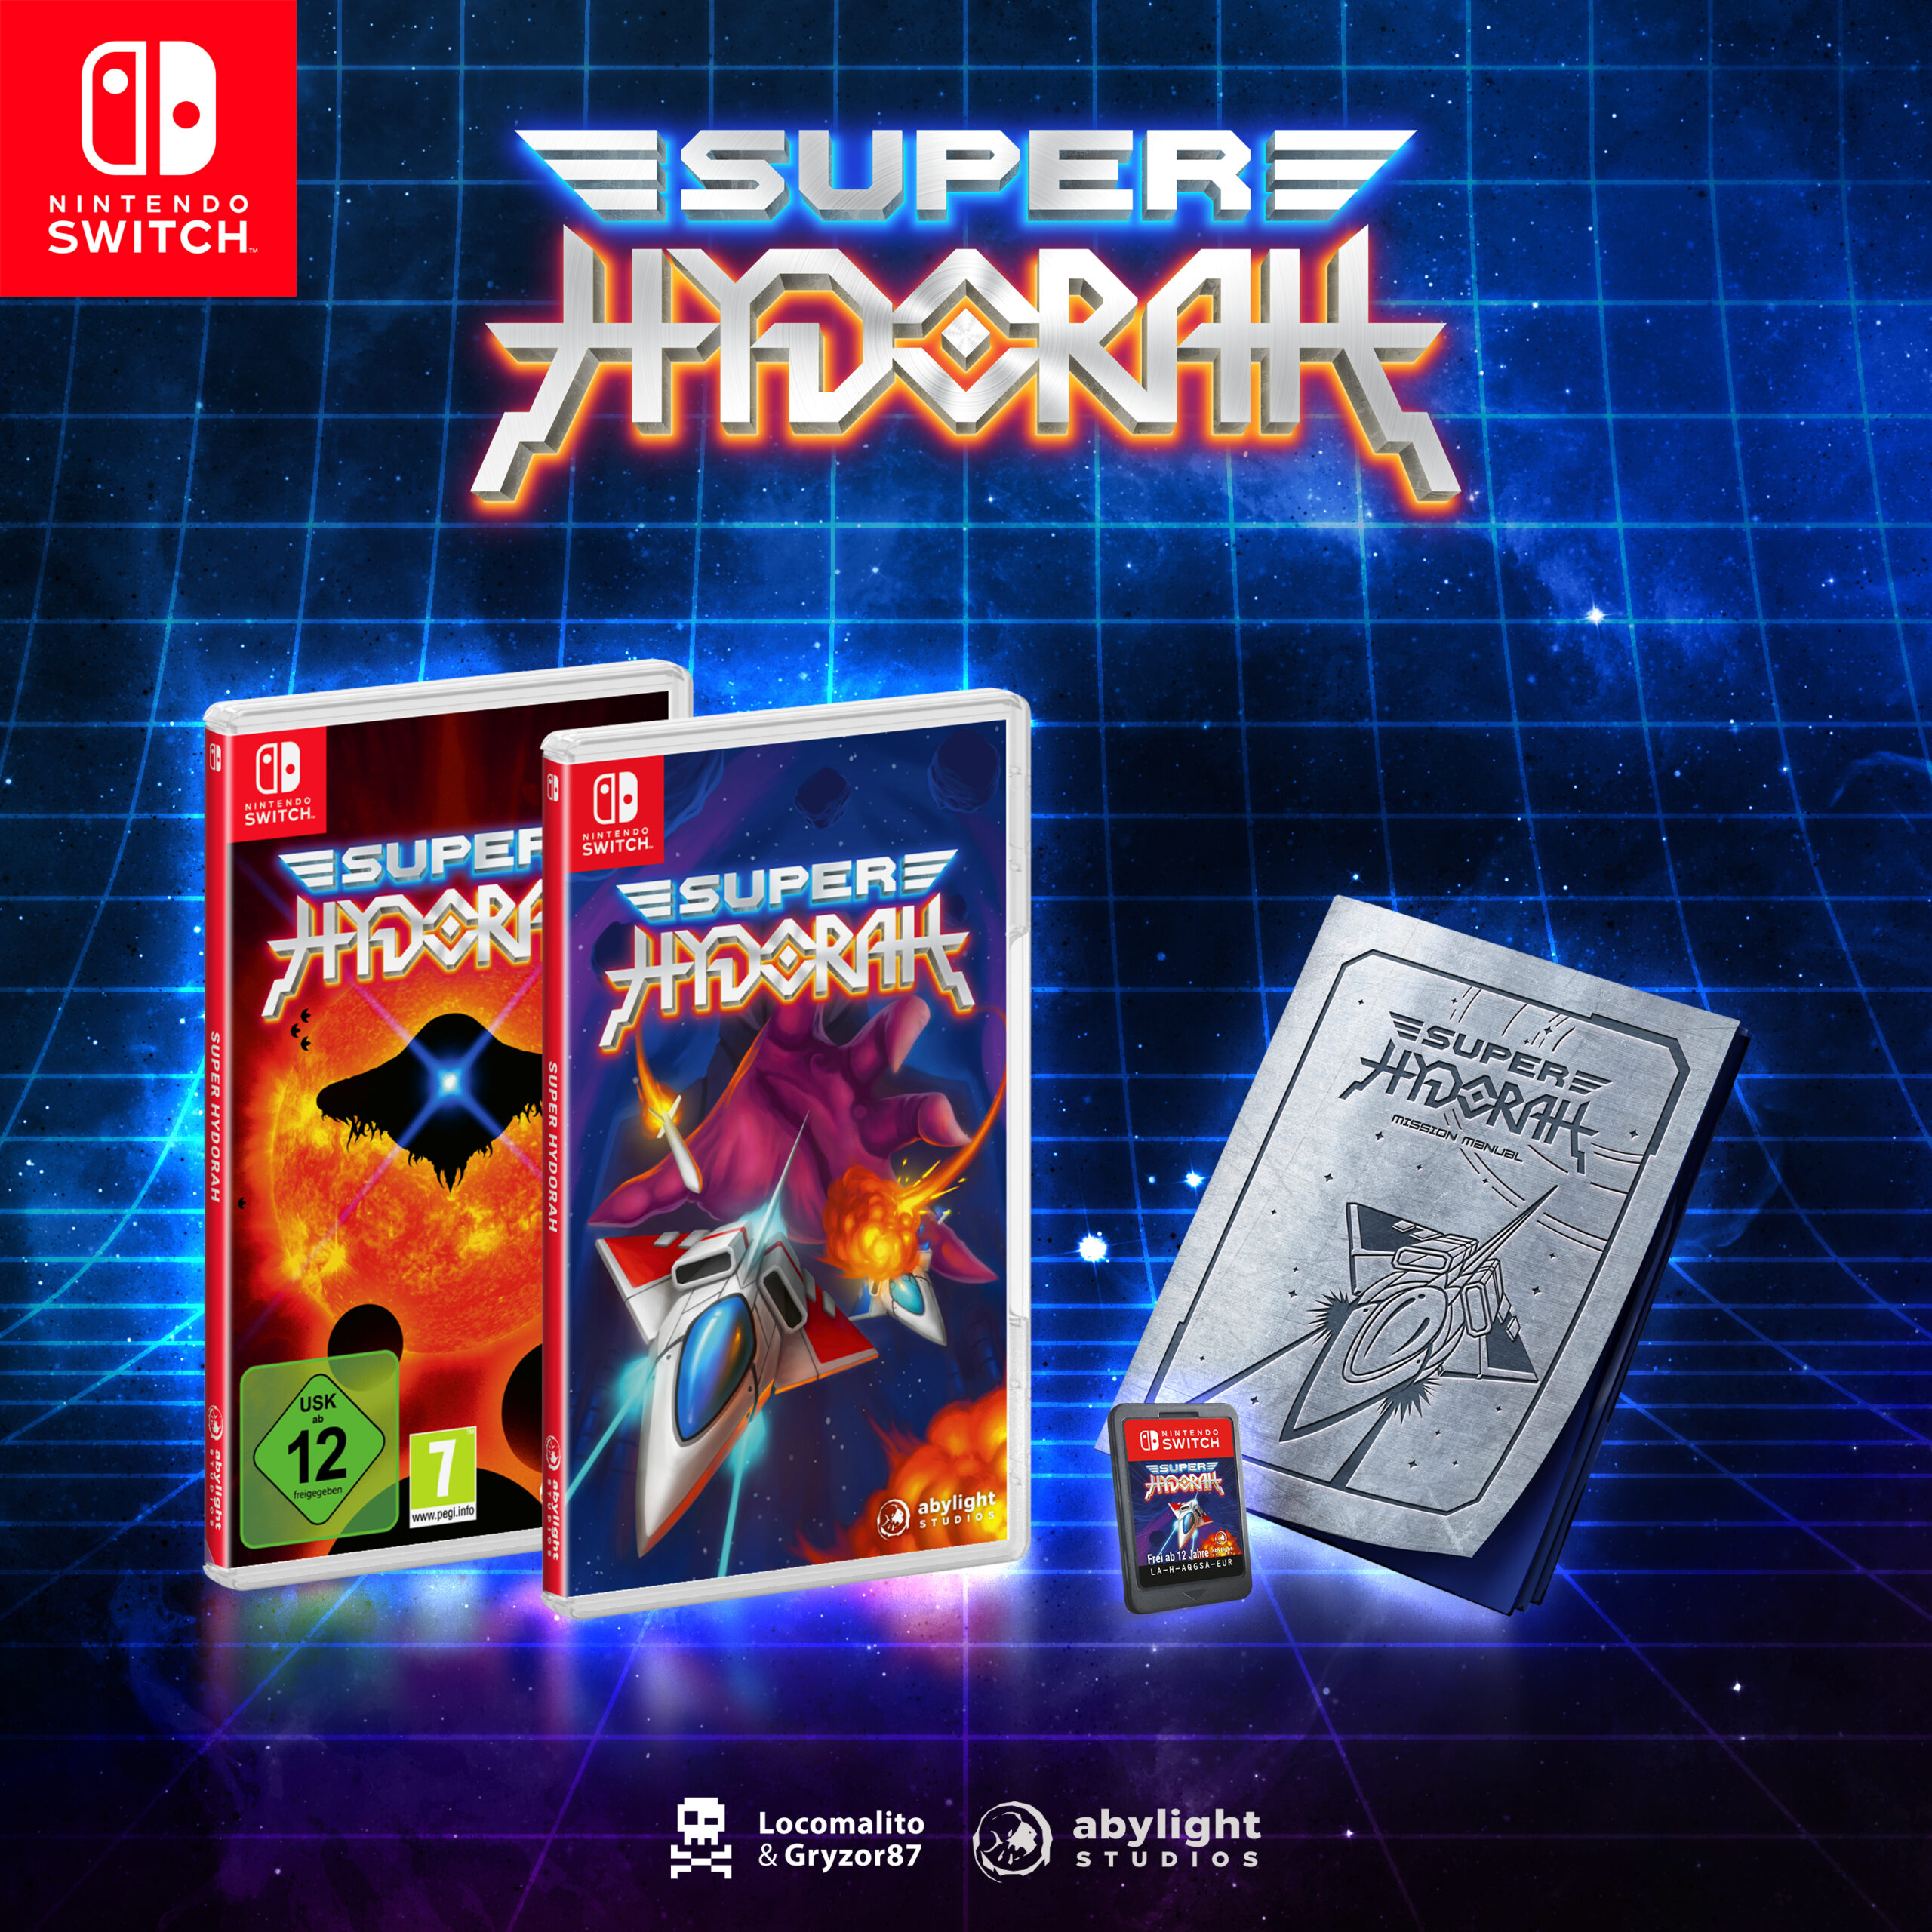 ▷ Super Hydorah for Nintendo Switch - Standard Edition | Abylight